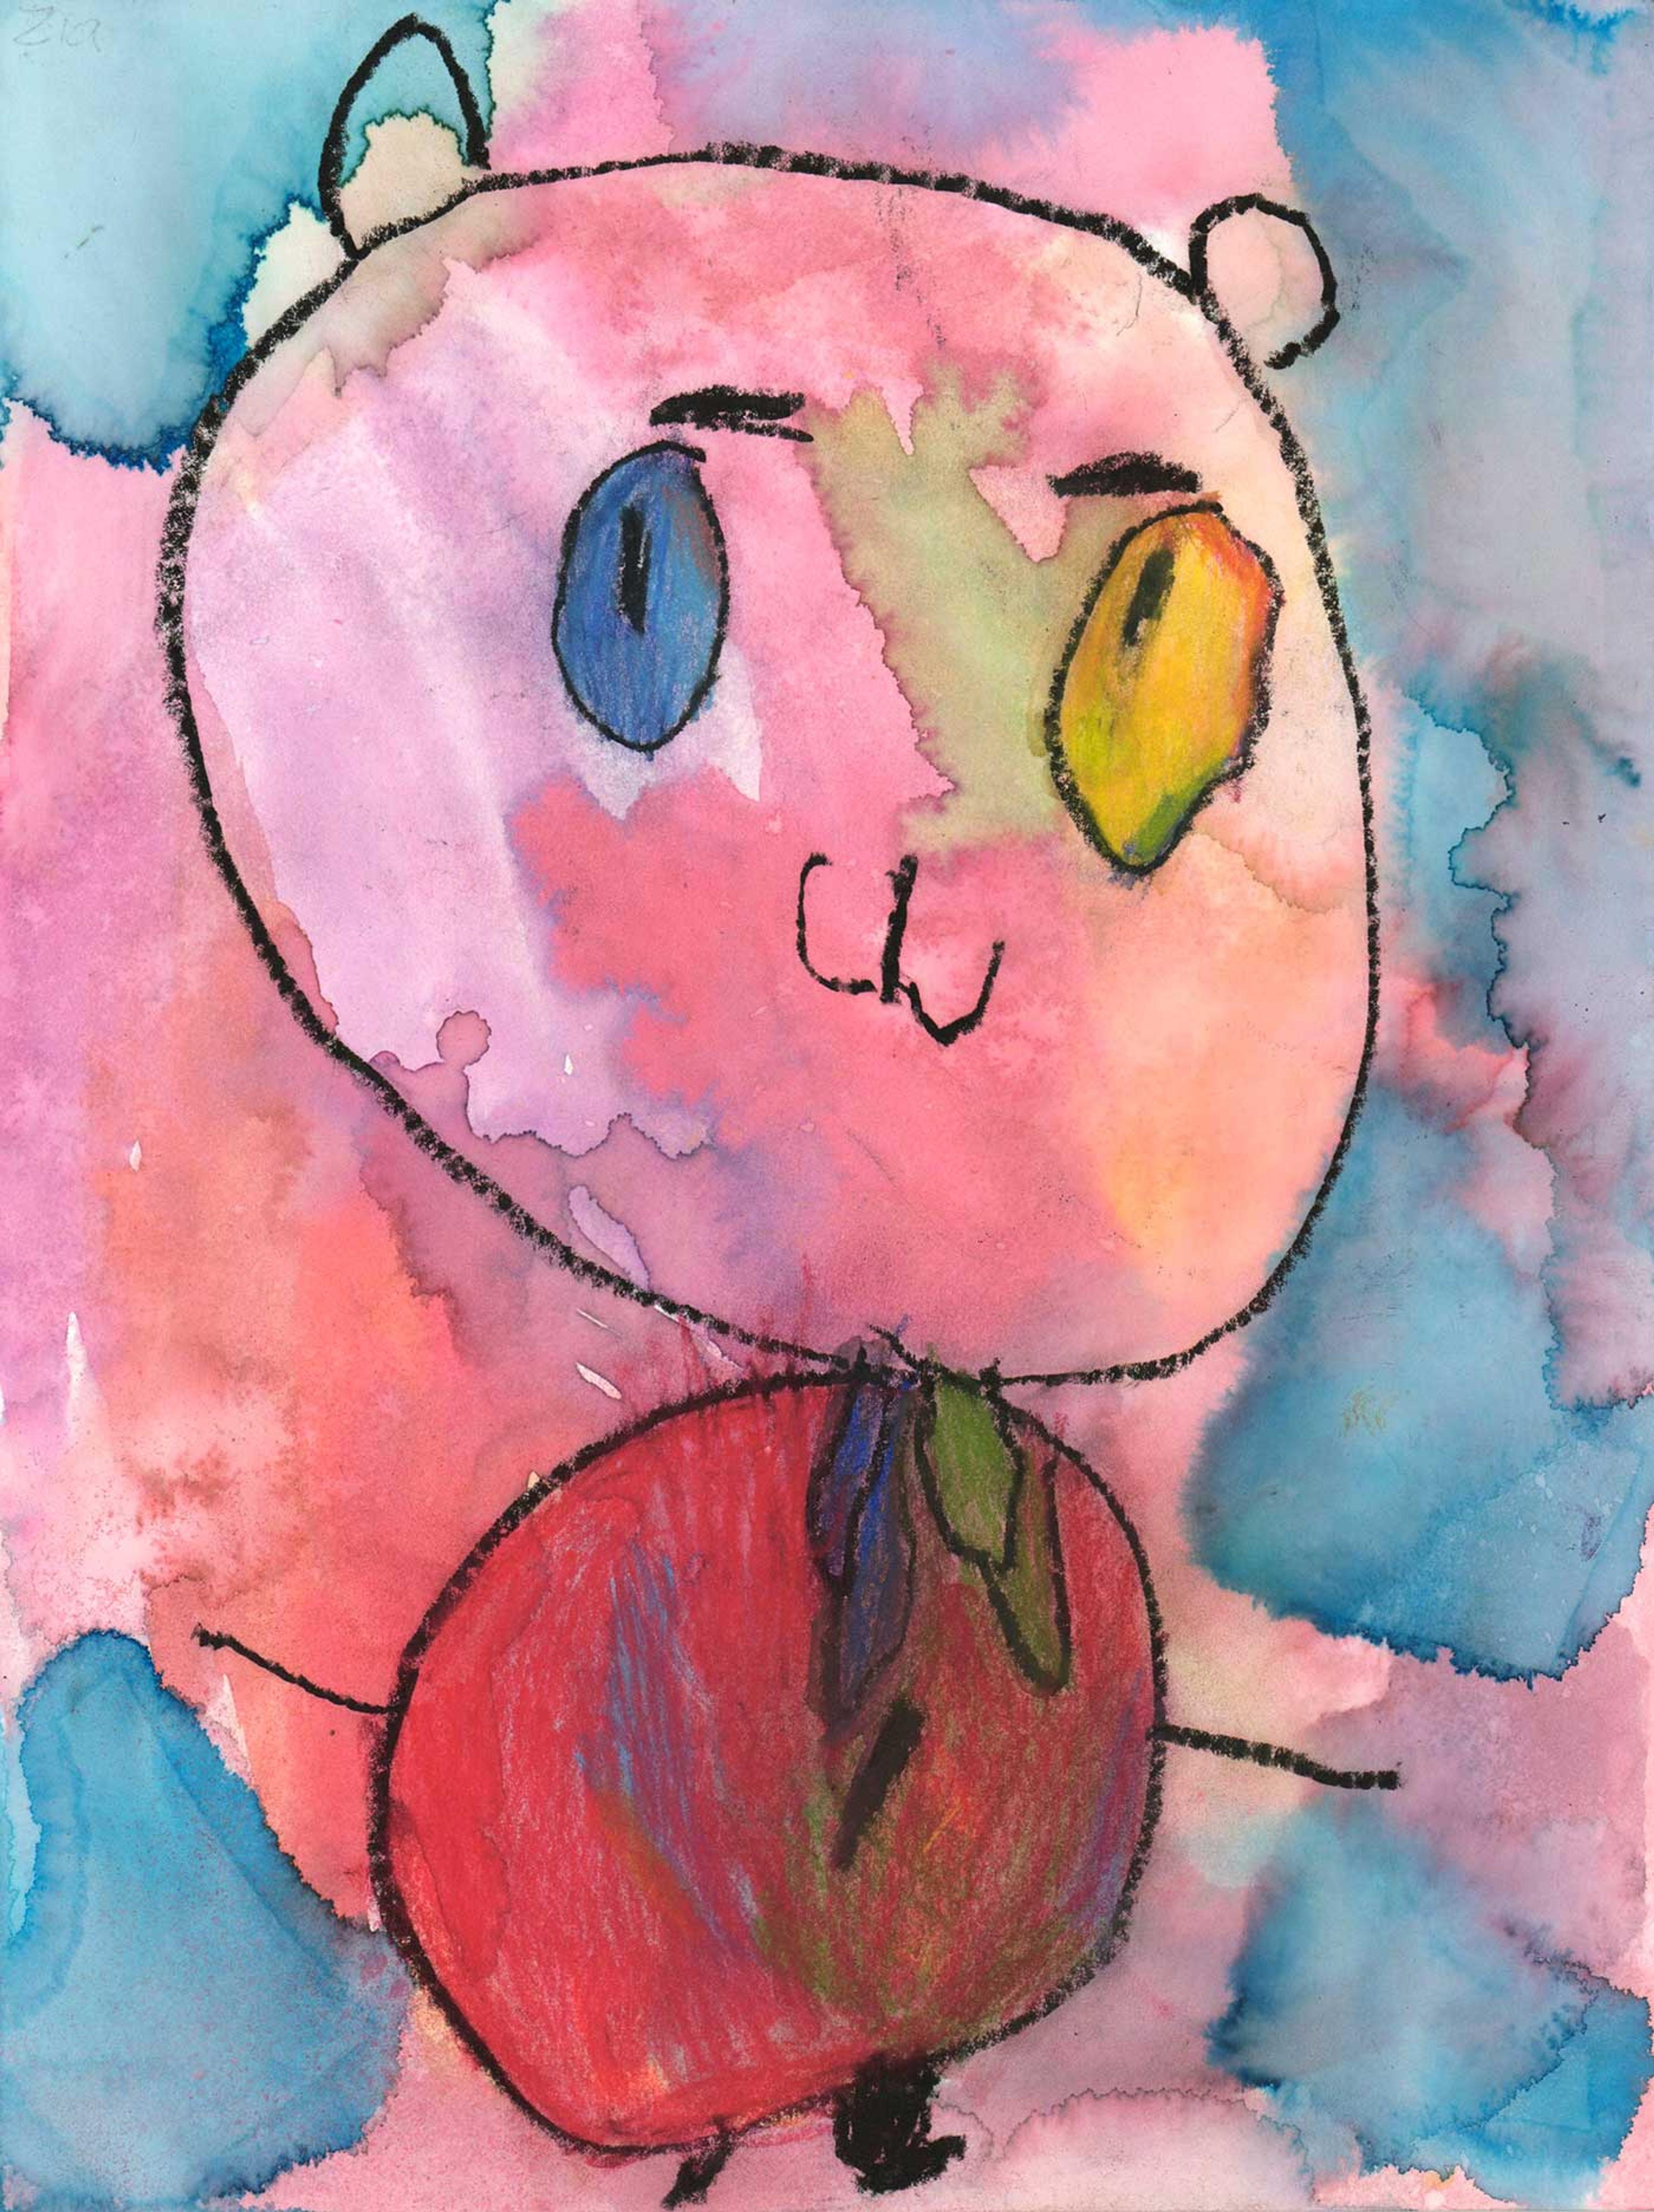 Drawing of a teddy bear with a red shirt on a blue and pink background.